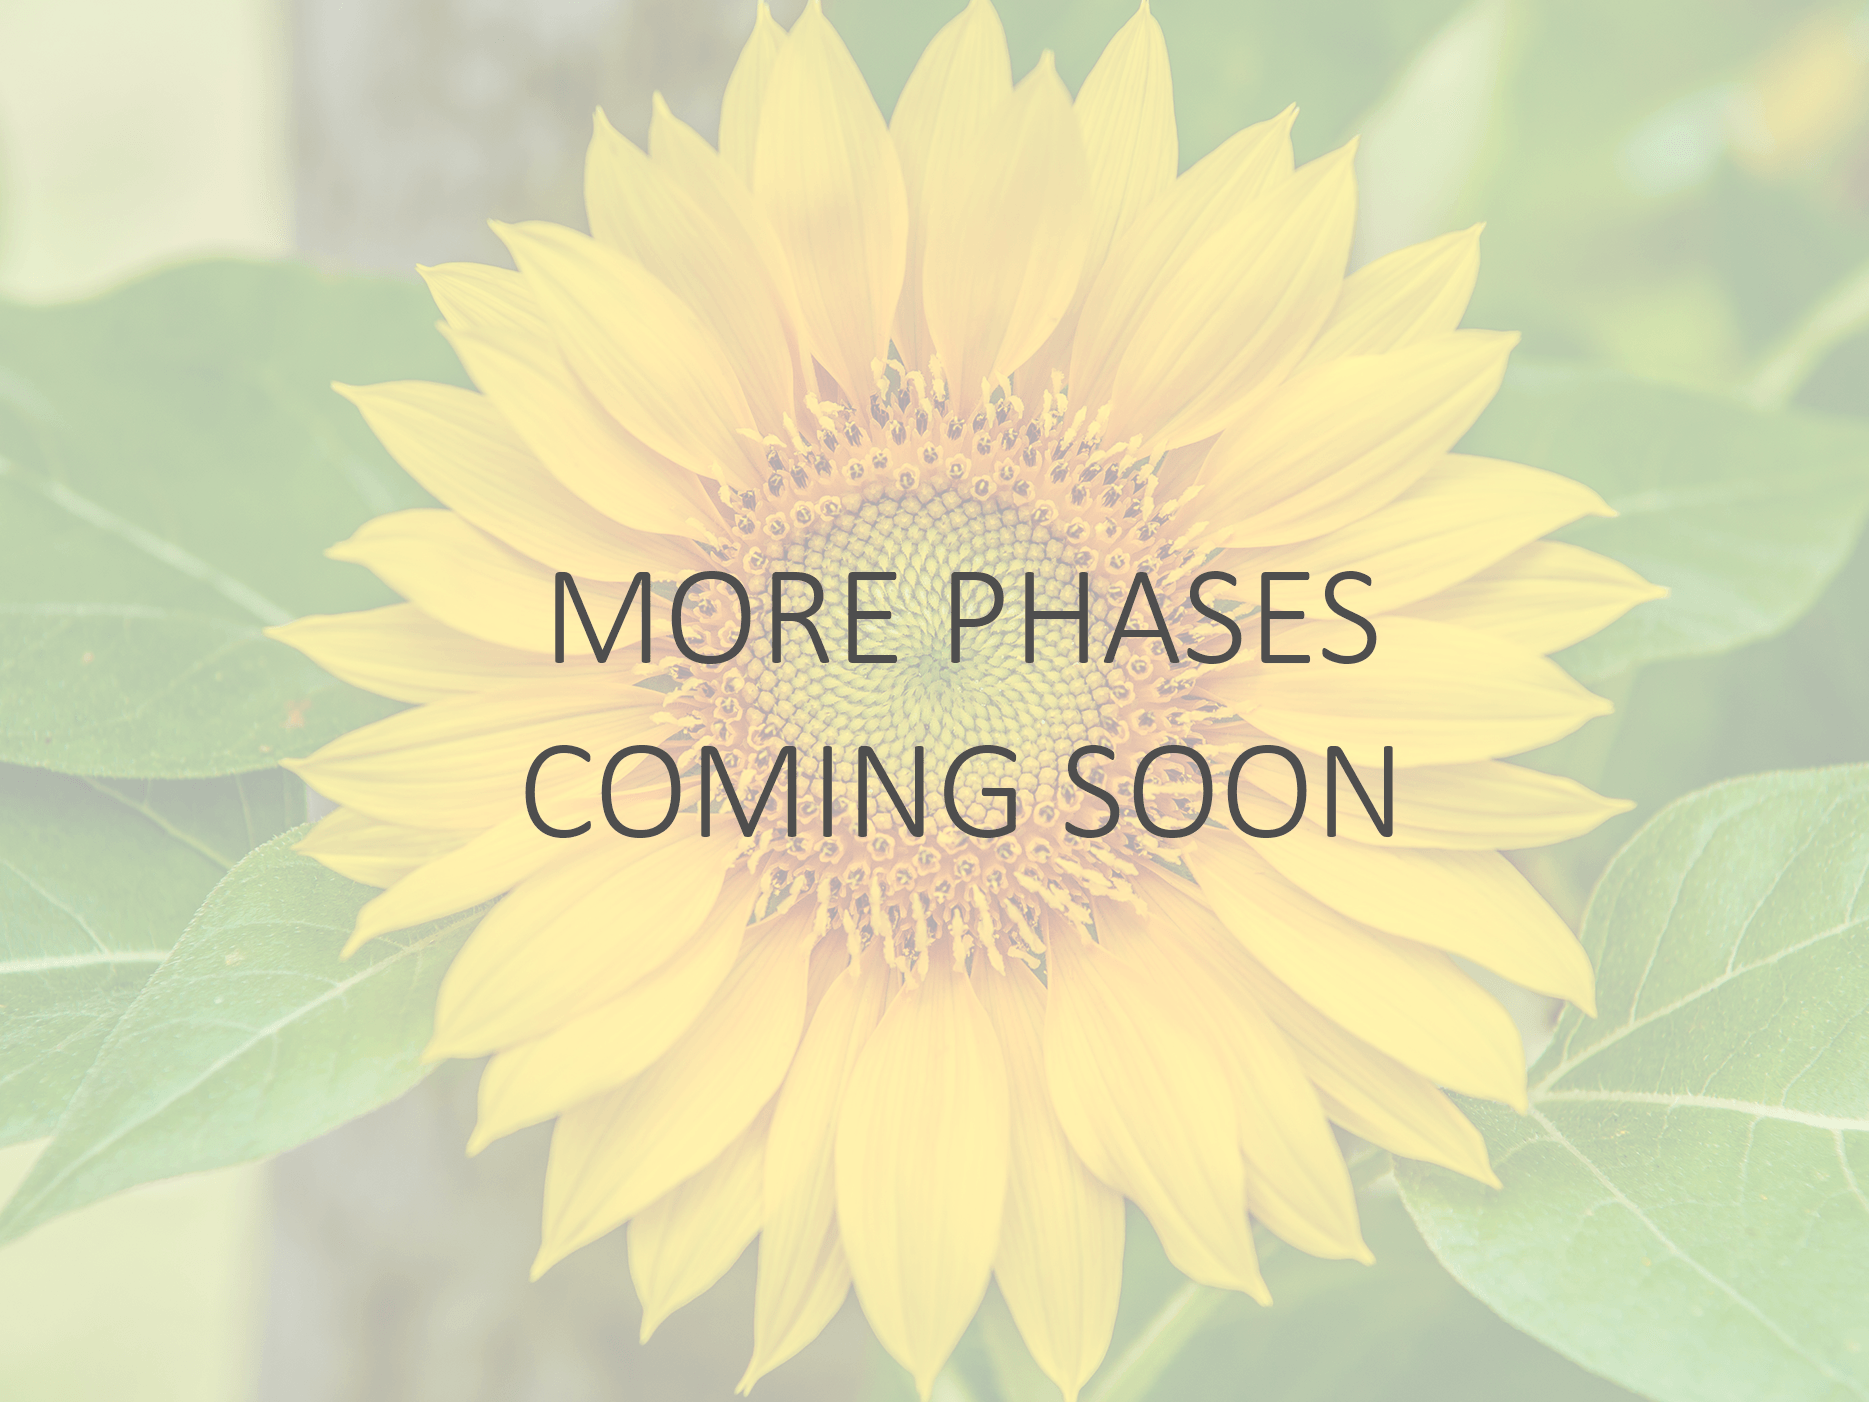 More phases coming soon